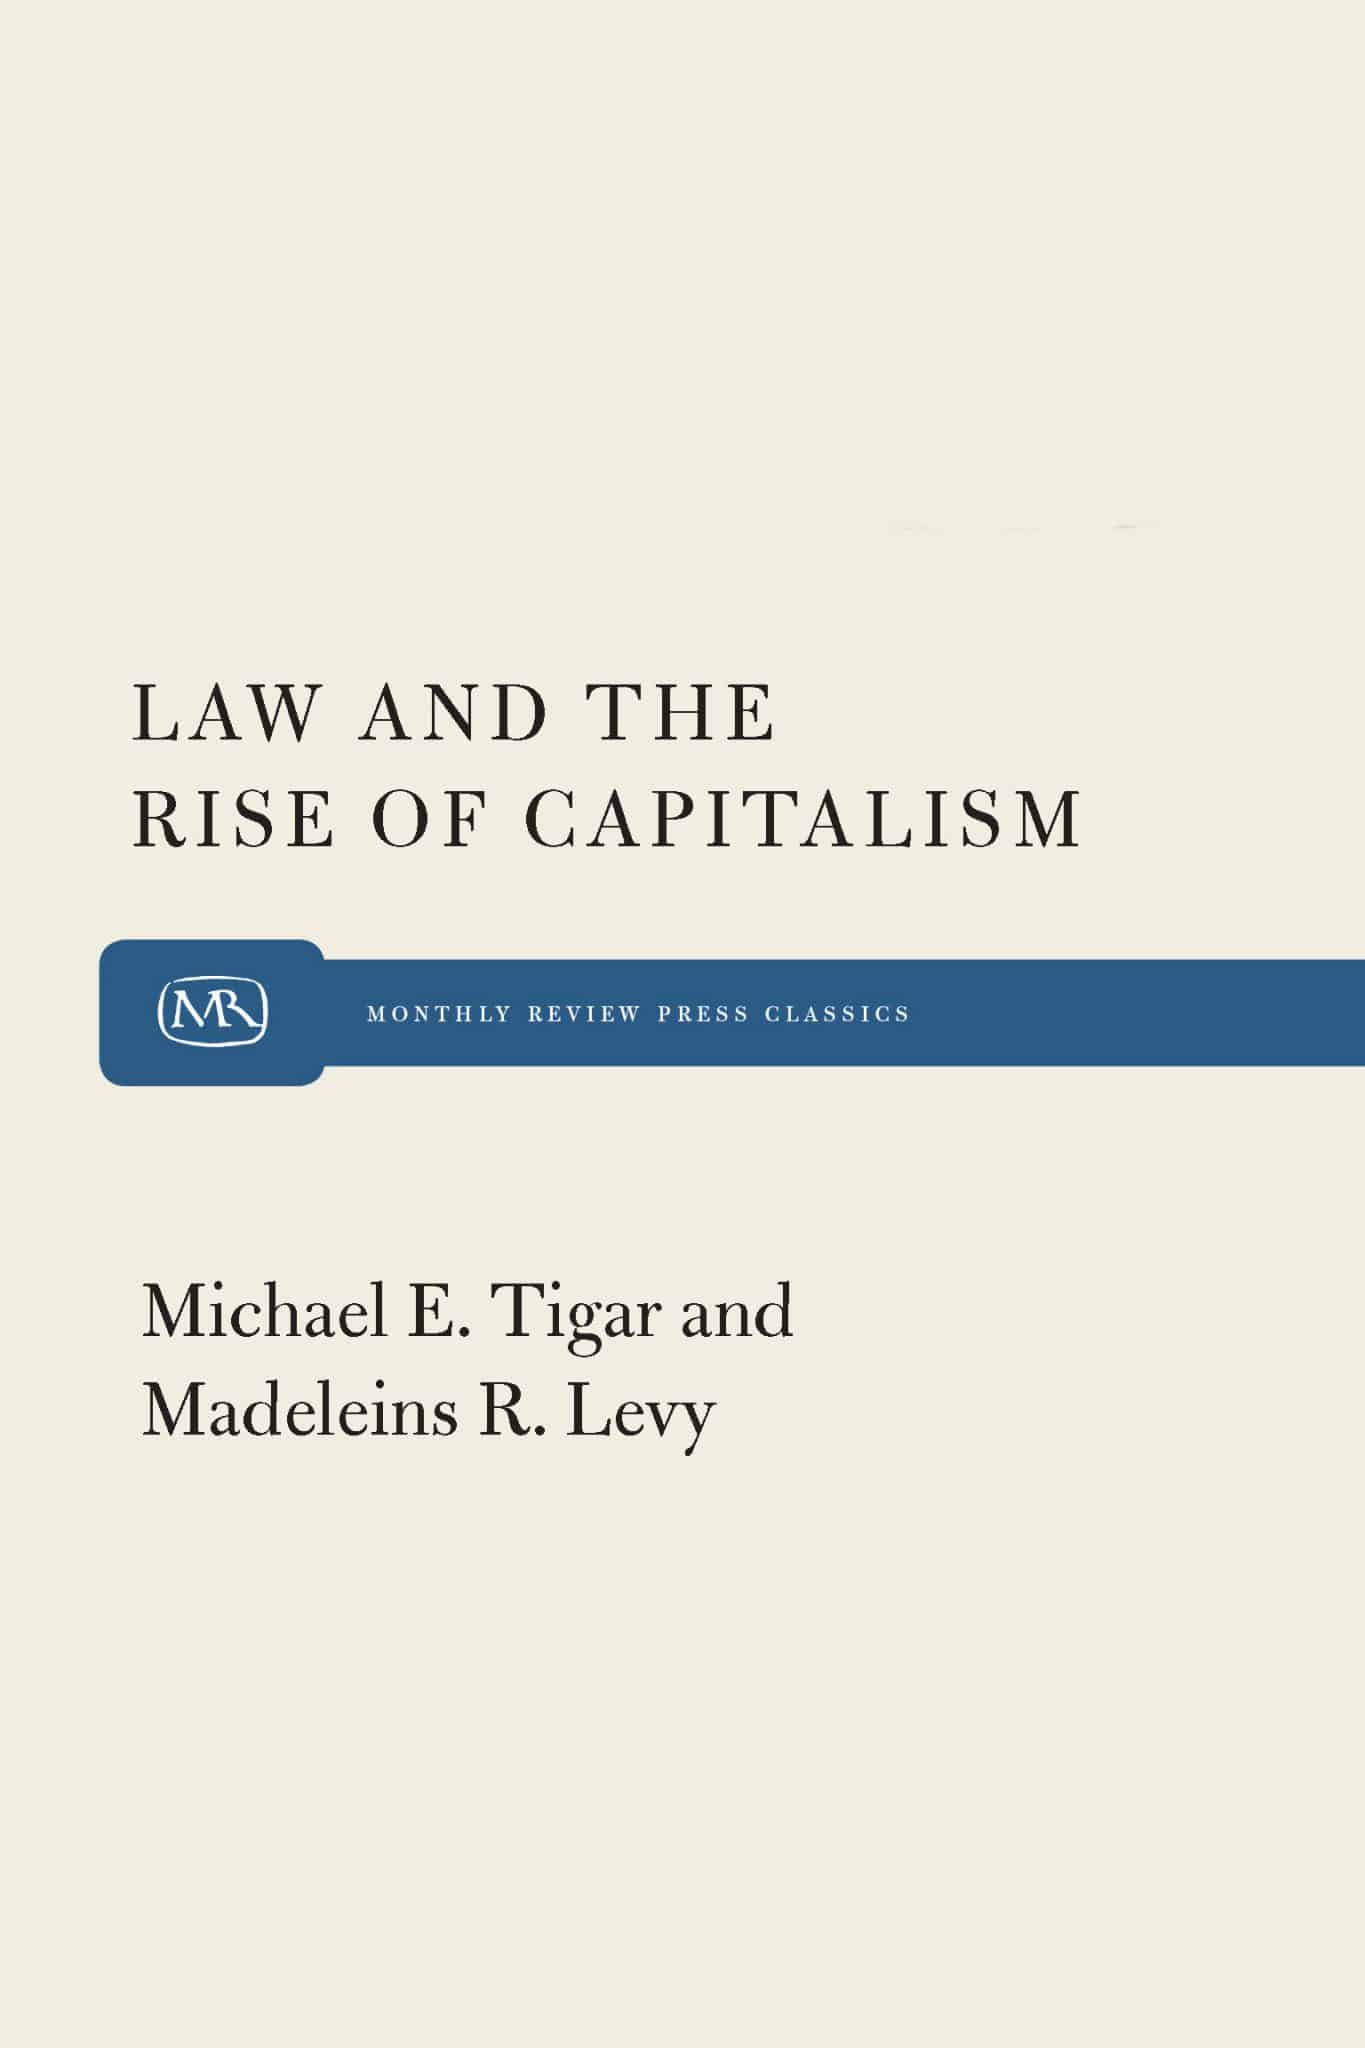 the　of　Rise　Review　Monthly　and　Law　Capitalism